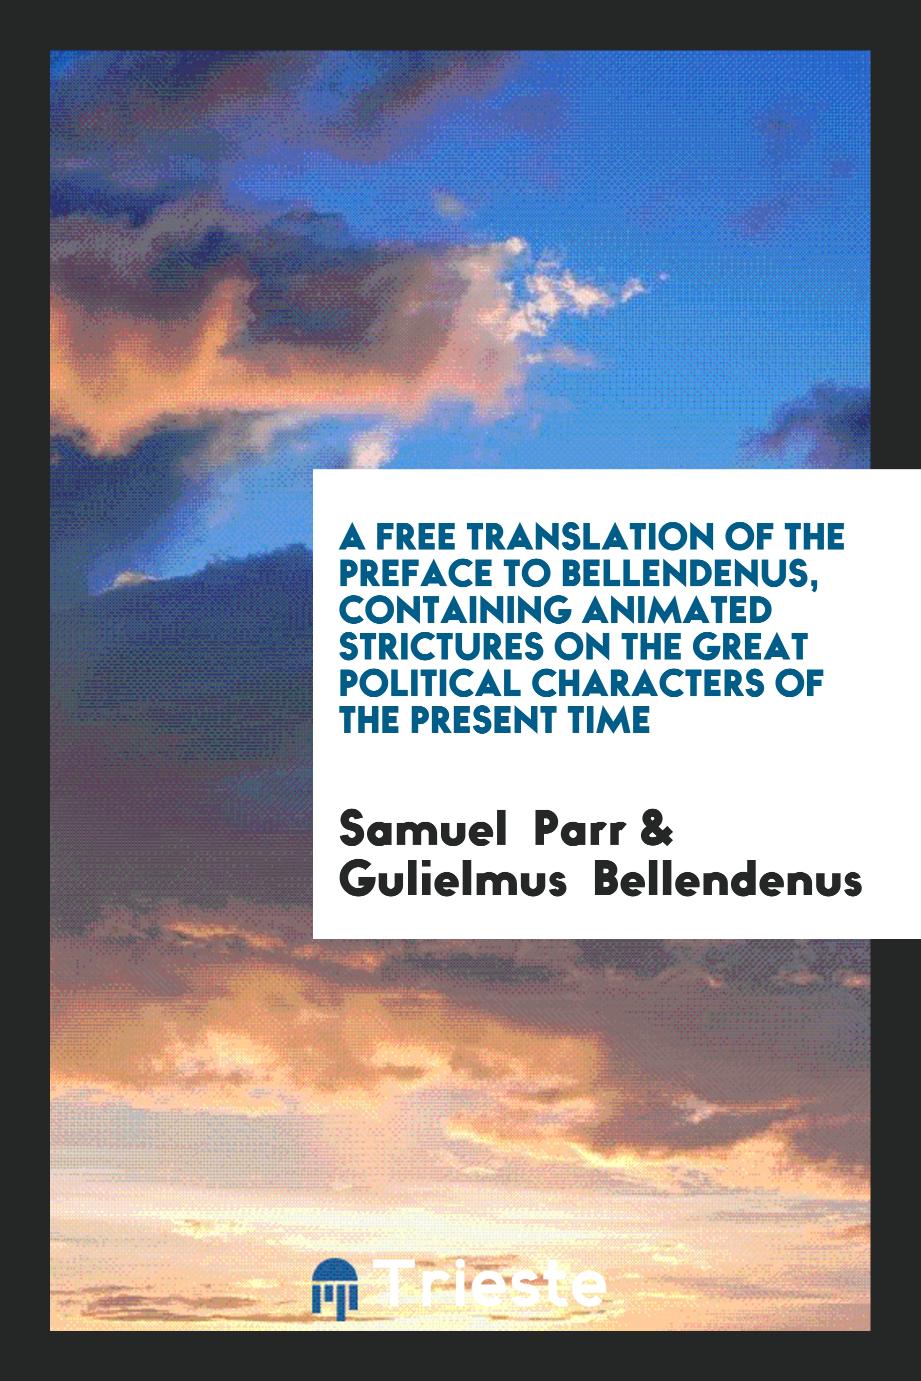 A Free Translation of the Preface to Bellendenus, Containing Animated Strictures on the Great Political Characters of the Present Time